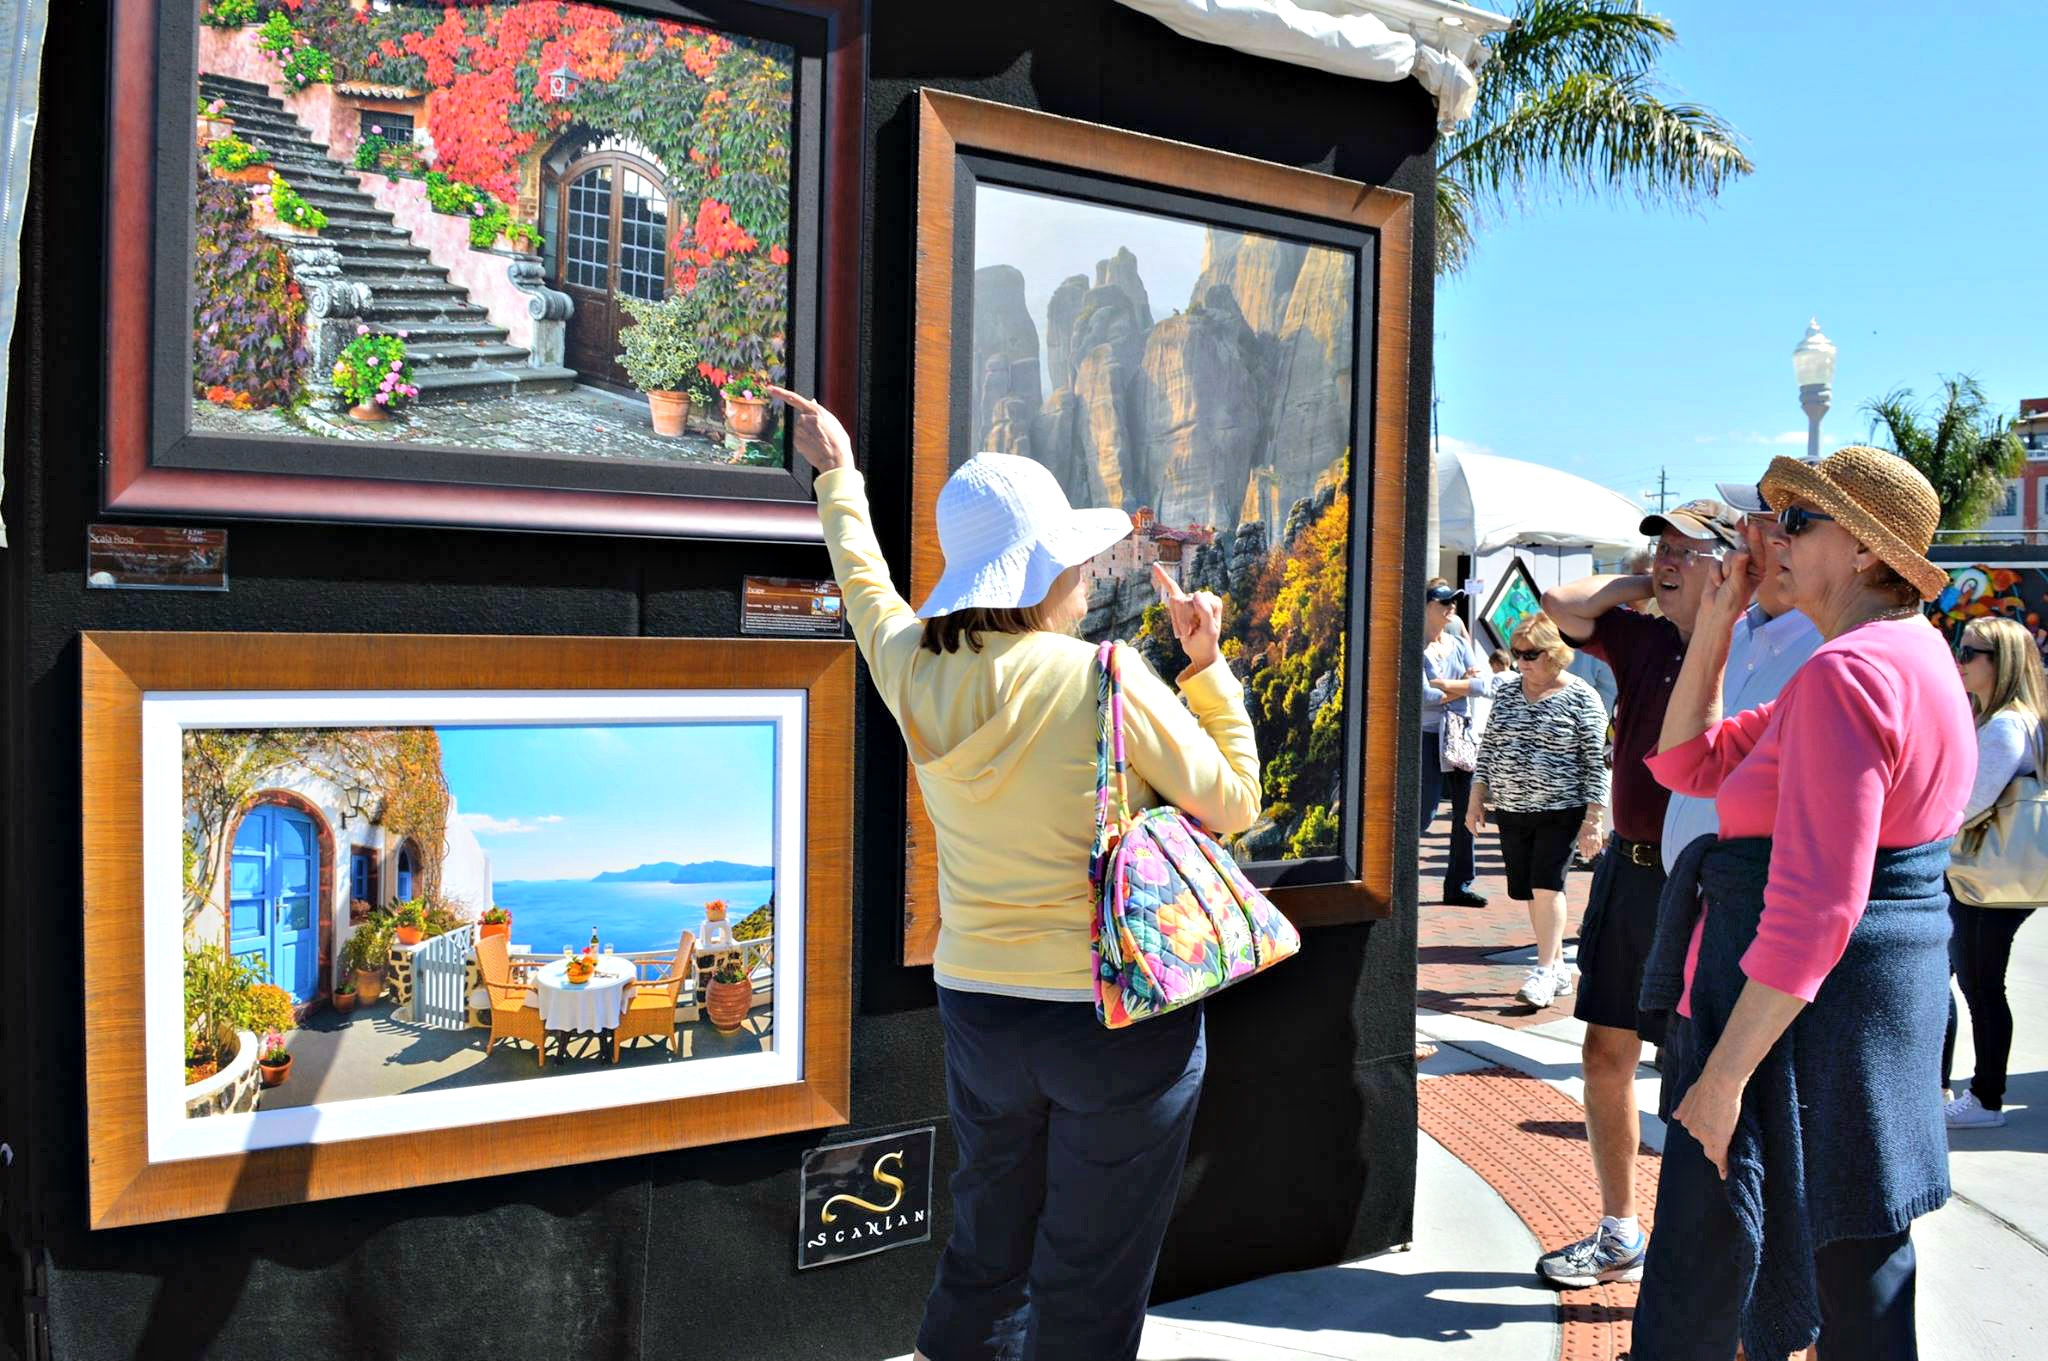 A pair of women shoppers survey an outdoor art display during ArtFest Fort Myers.